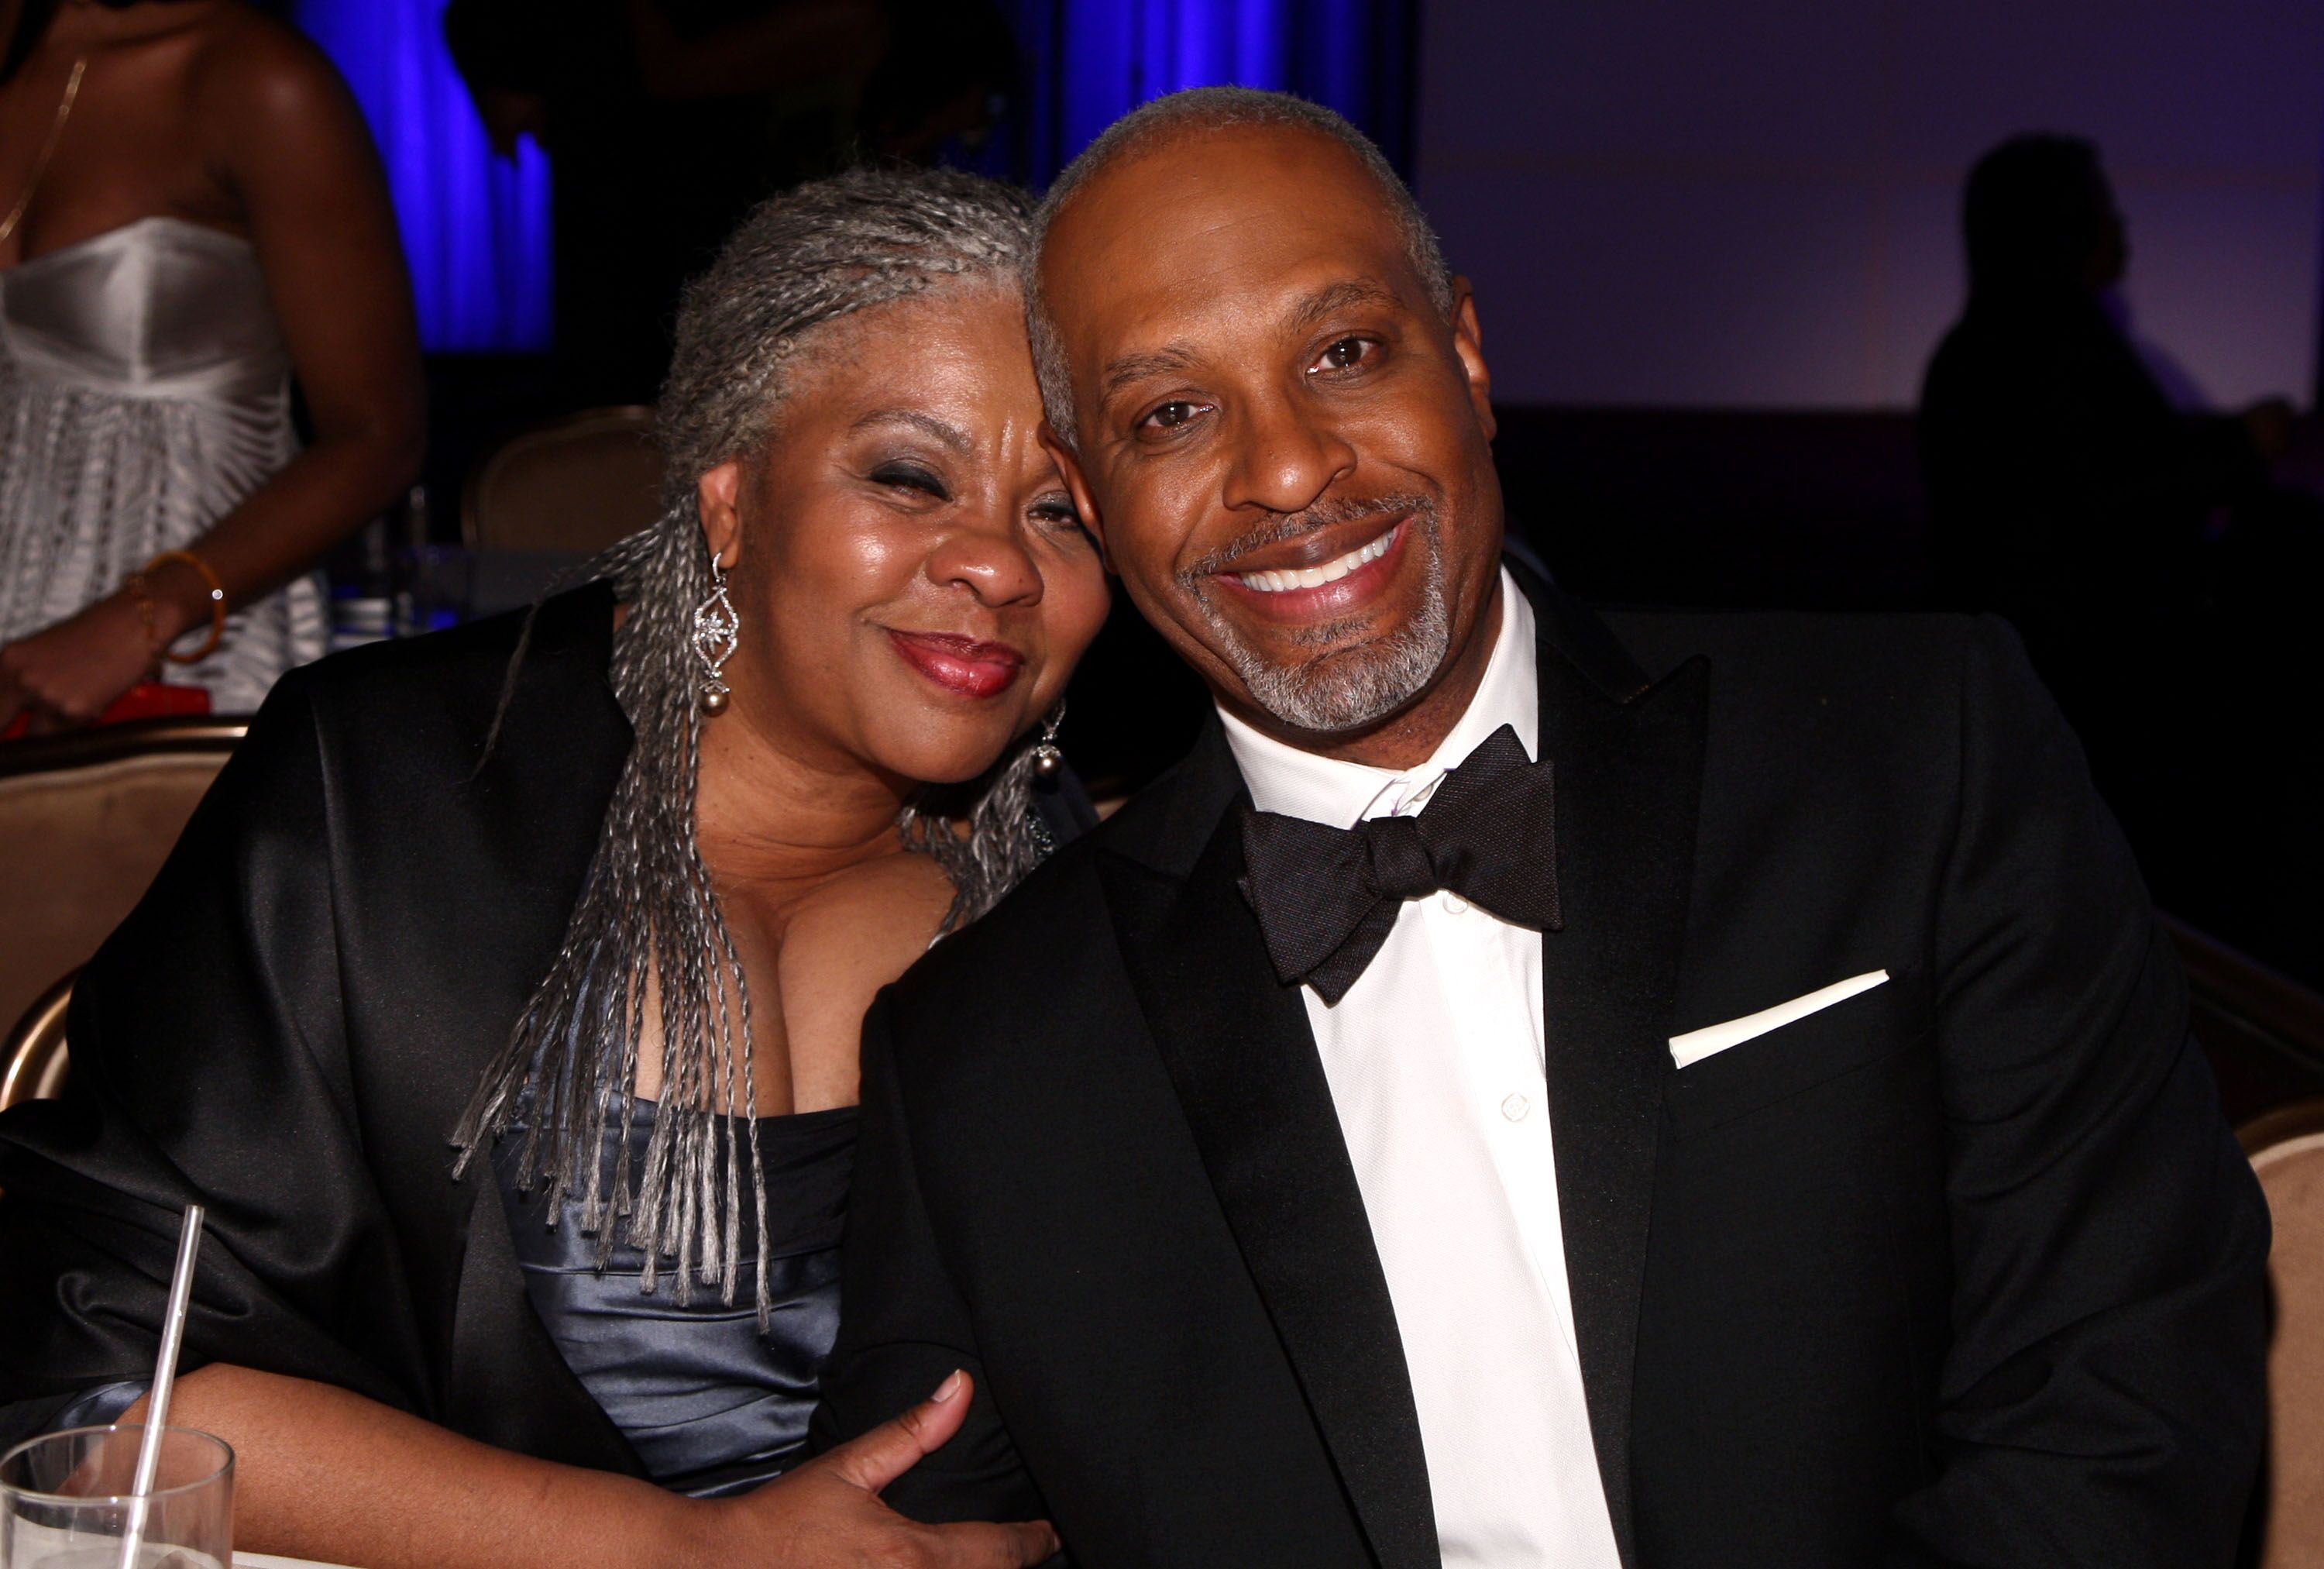 Actor James Pickens Jr and wife Gina Pickens at the after party for the 40th NAACP Image Awards on February 12, 2009 | Photo: Getty Images